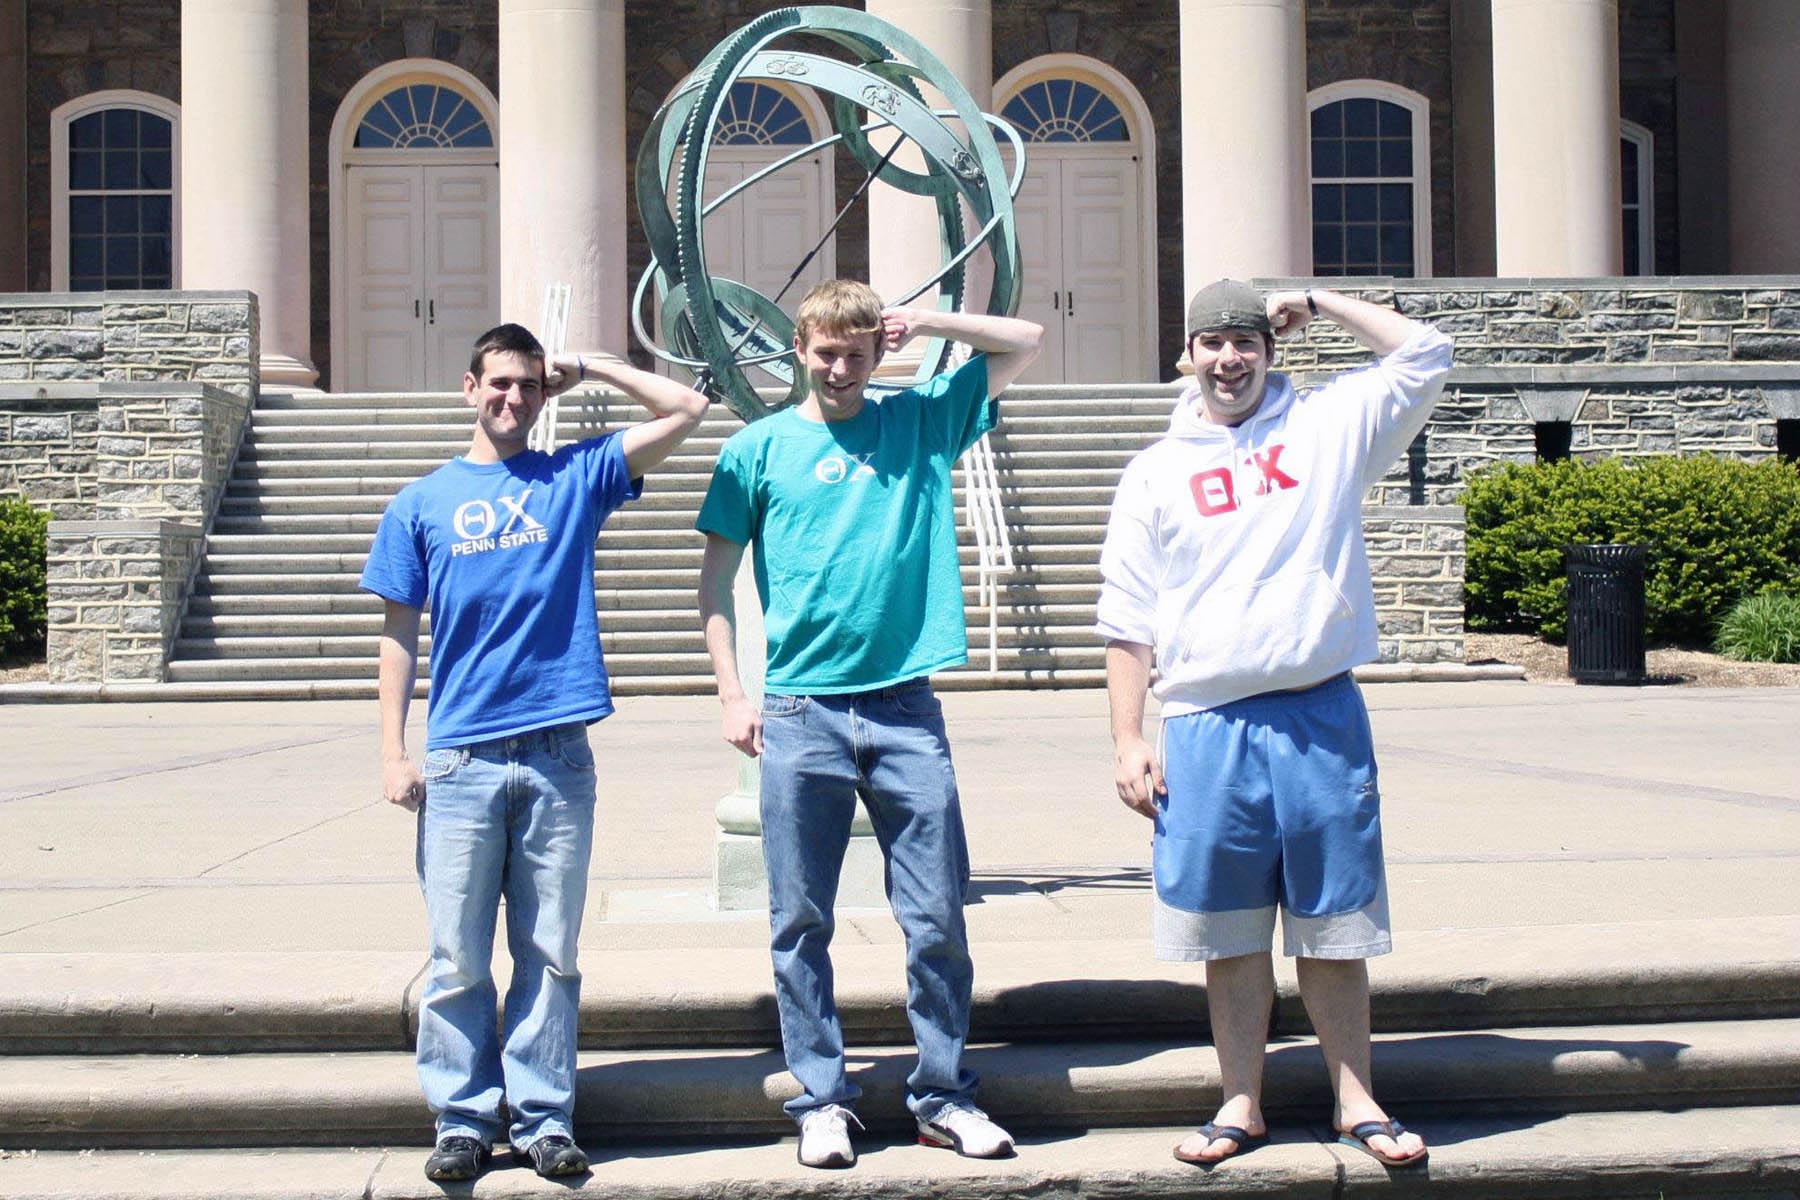  L to R: Nick Lello, Eric Cushing and Cameron Anthony Michael Hunting
2012 End of Spring Semeste 